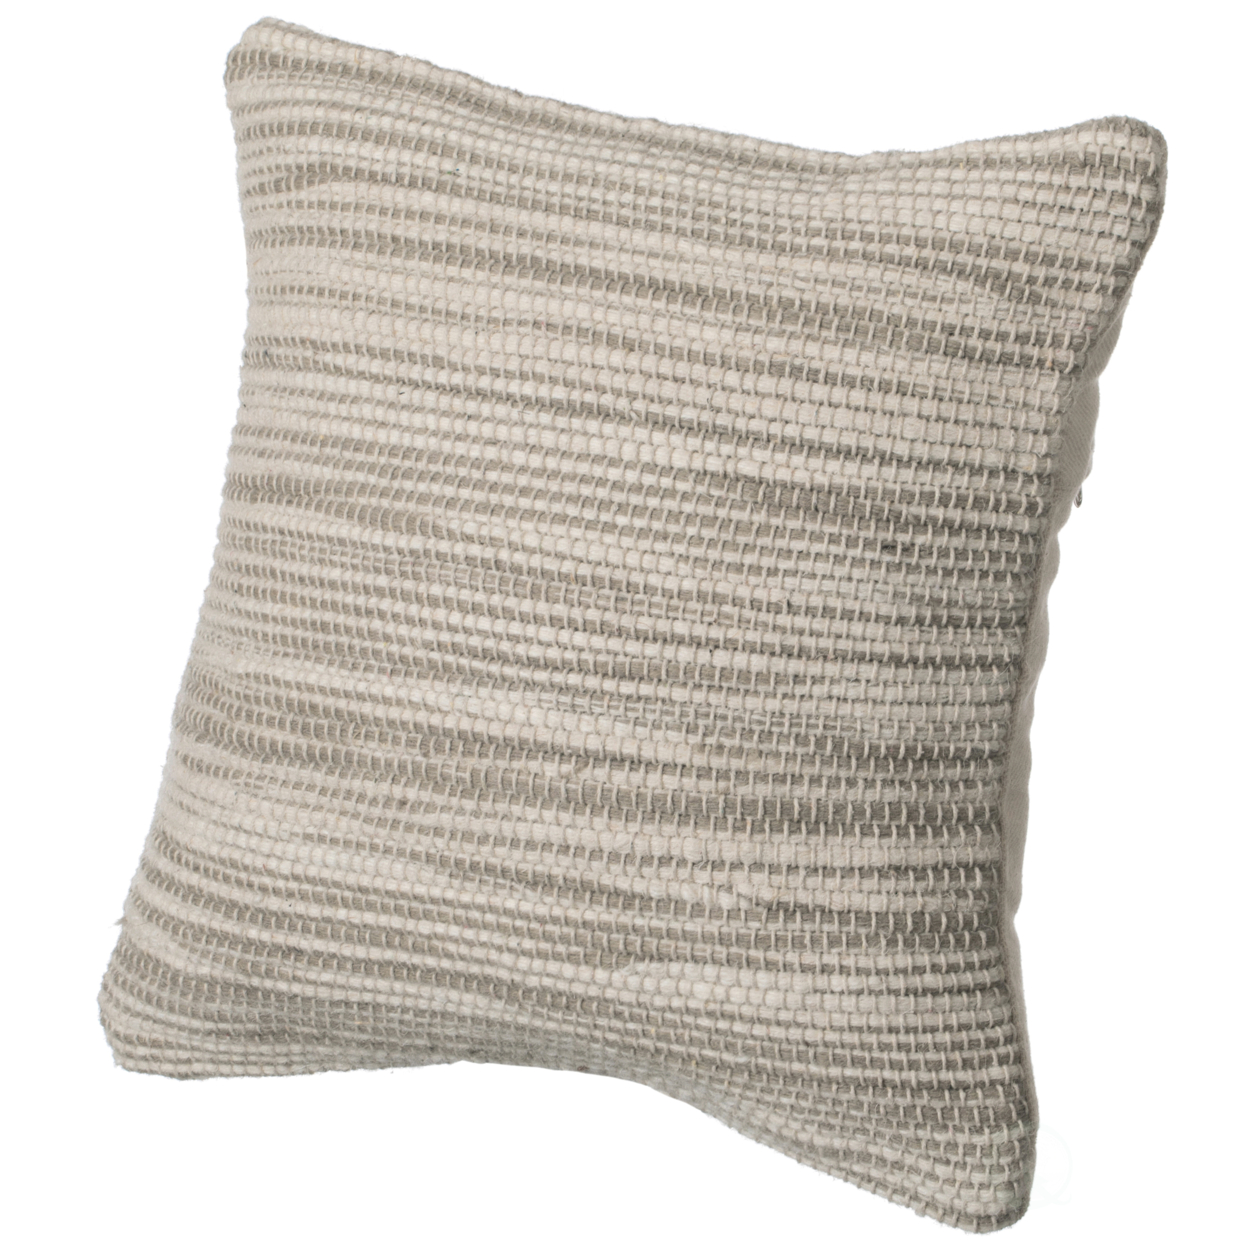 16 Handwoven Wool & Cotton Throw Pillow Cover With Woven Knit Texture - Blue With Cushion